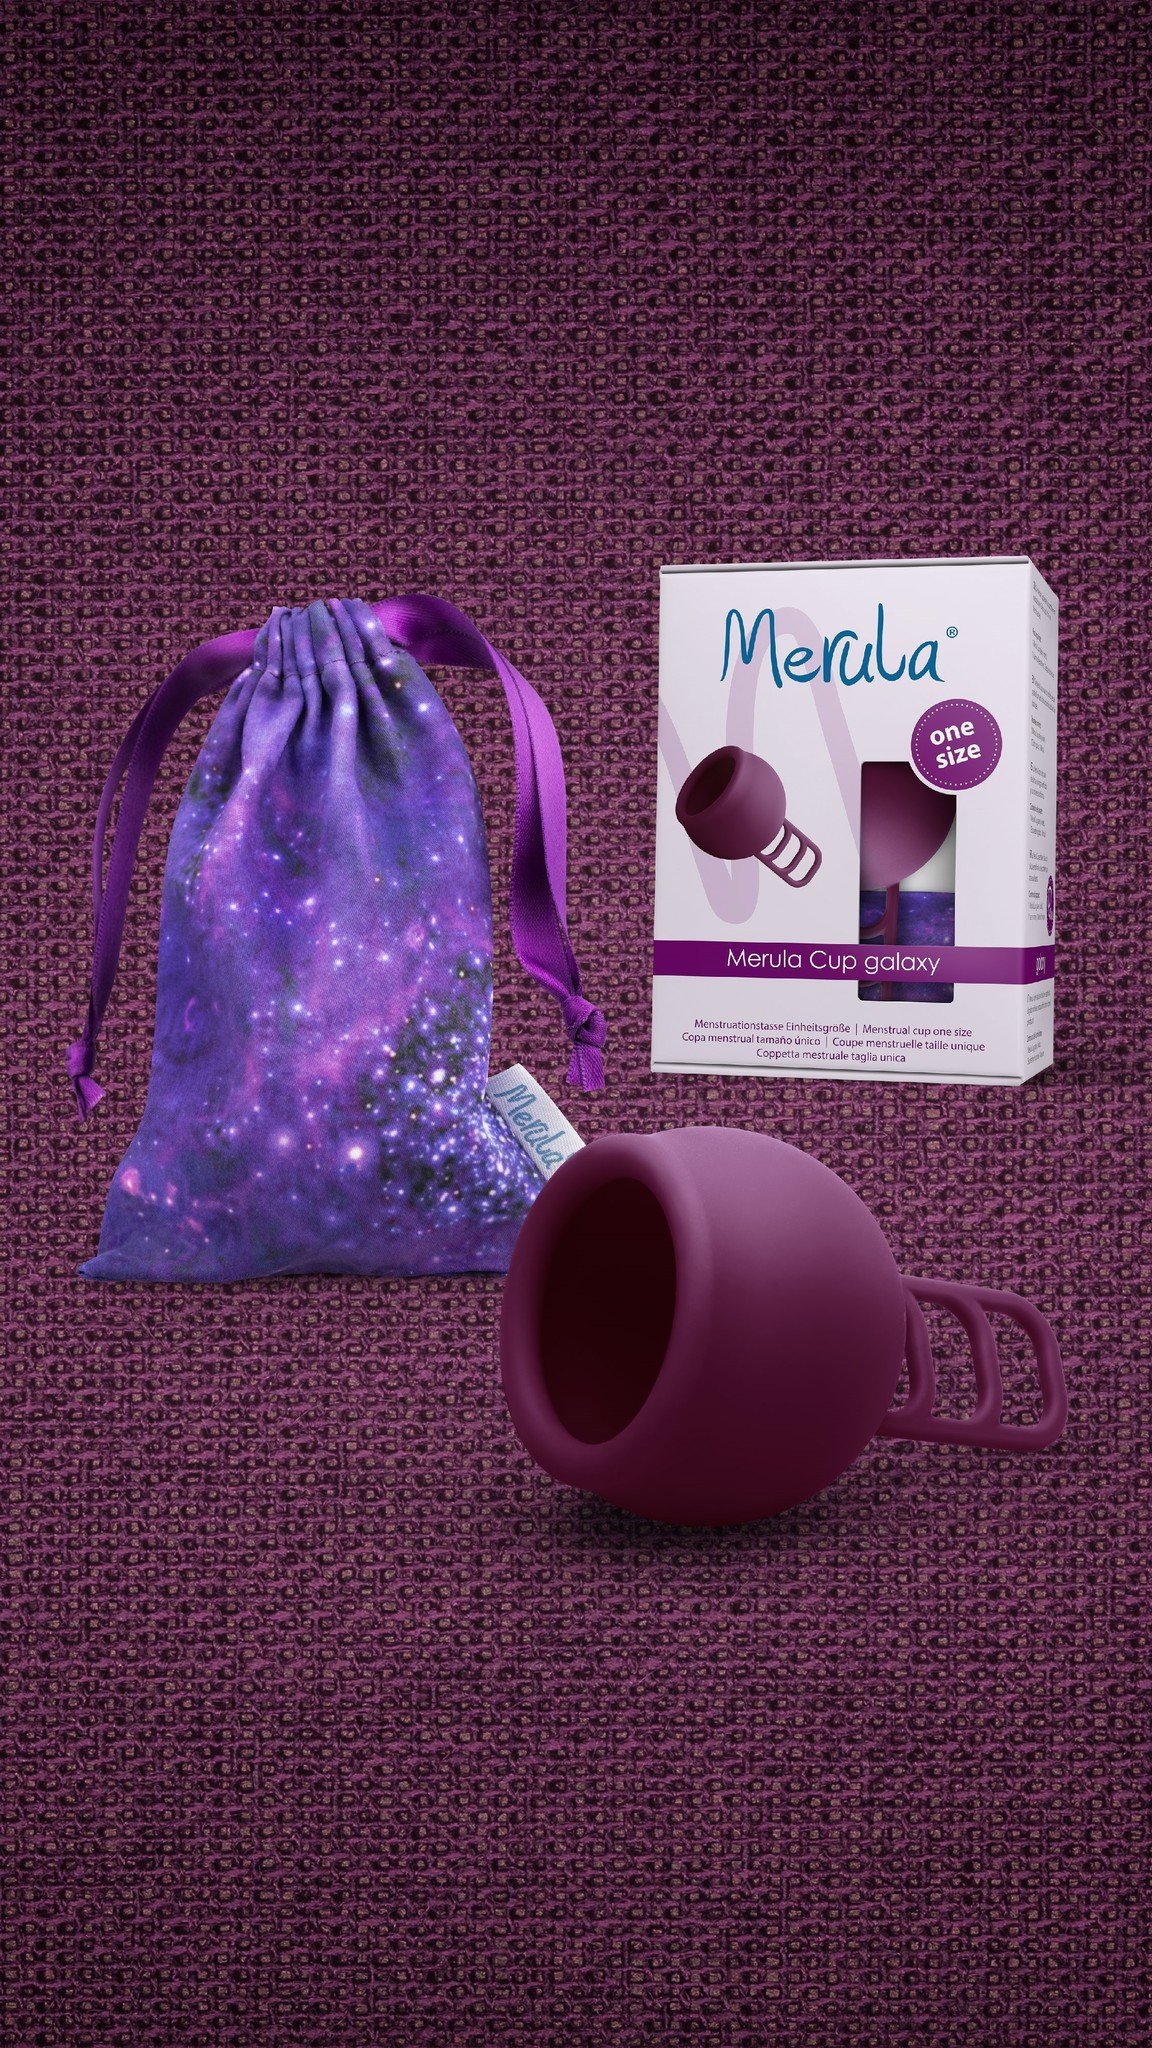  Merula Cup Galaxy (Violet) - One Size Menstrual Cup